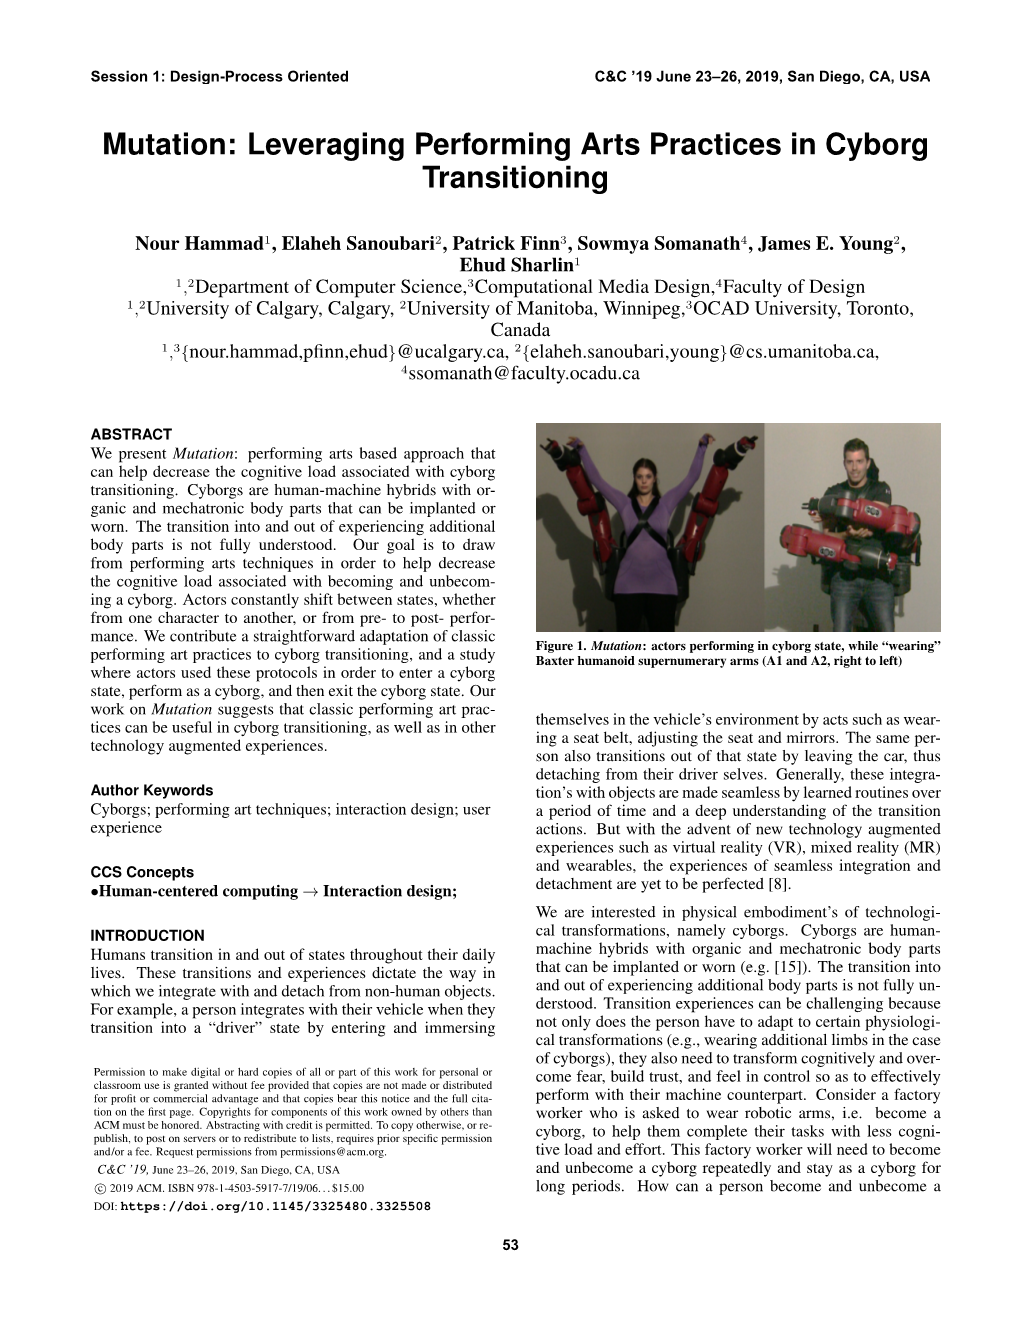 Leveraging Performing Arts Practices in Cyborg Transitioning